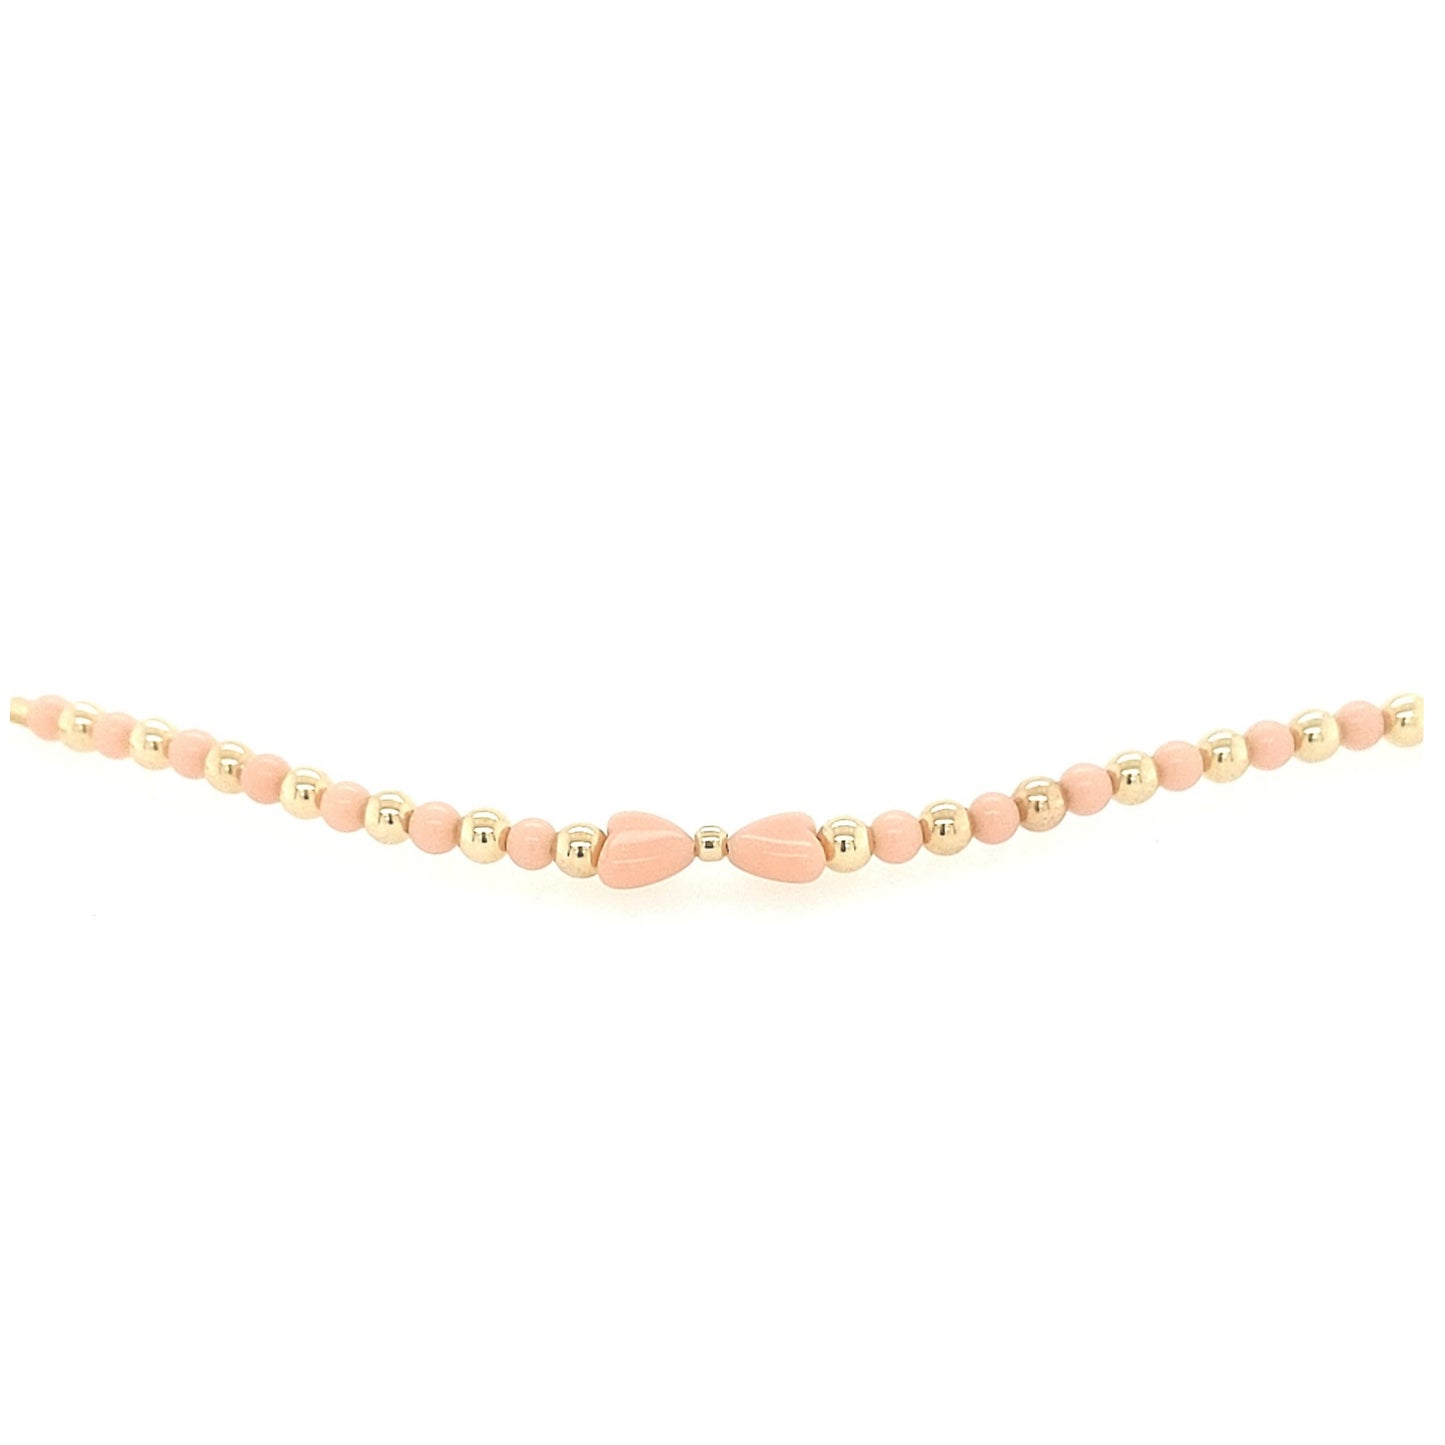 Alternating Gold Filled and Pink Beads With Two Red Hearts in the Center Children's Bracelet - HK Jewels